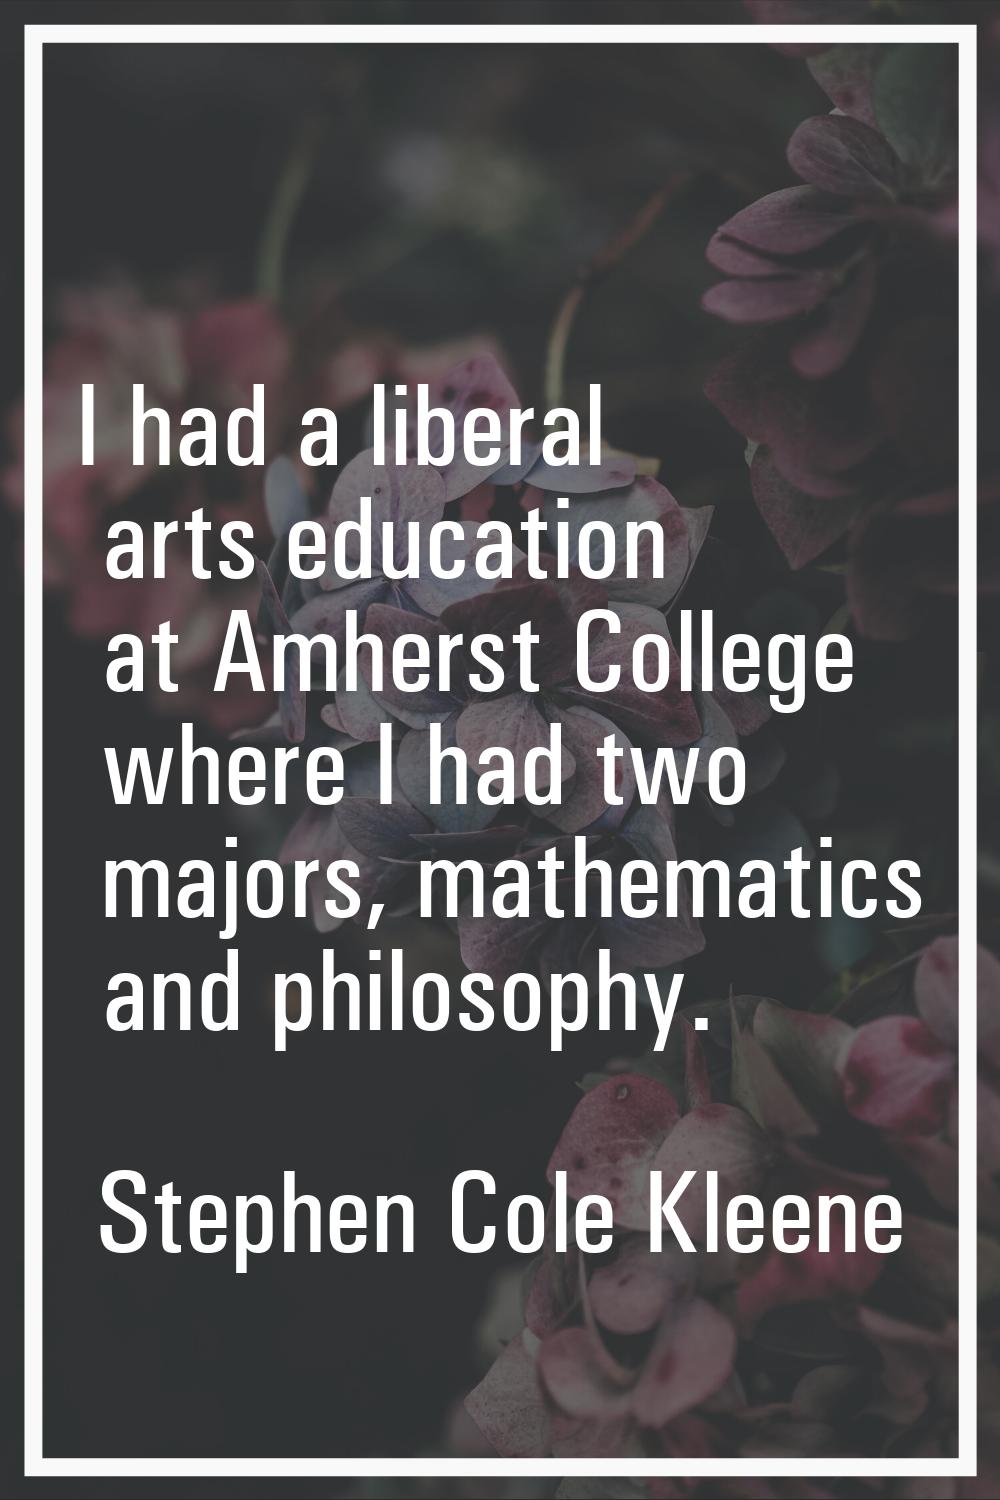 I had a liberal arts education at Amherst College where I had two majors, mathematics and philosoph